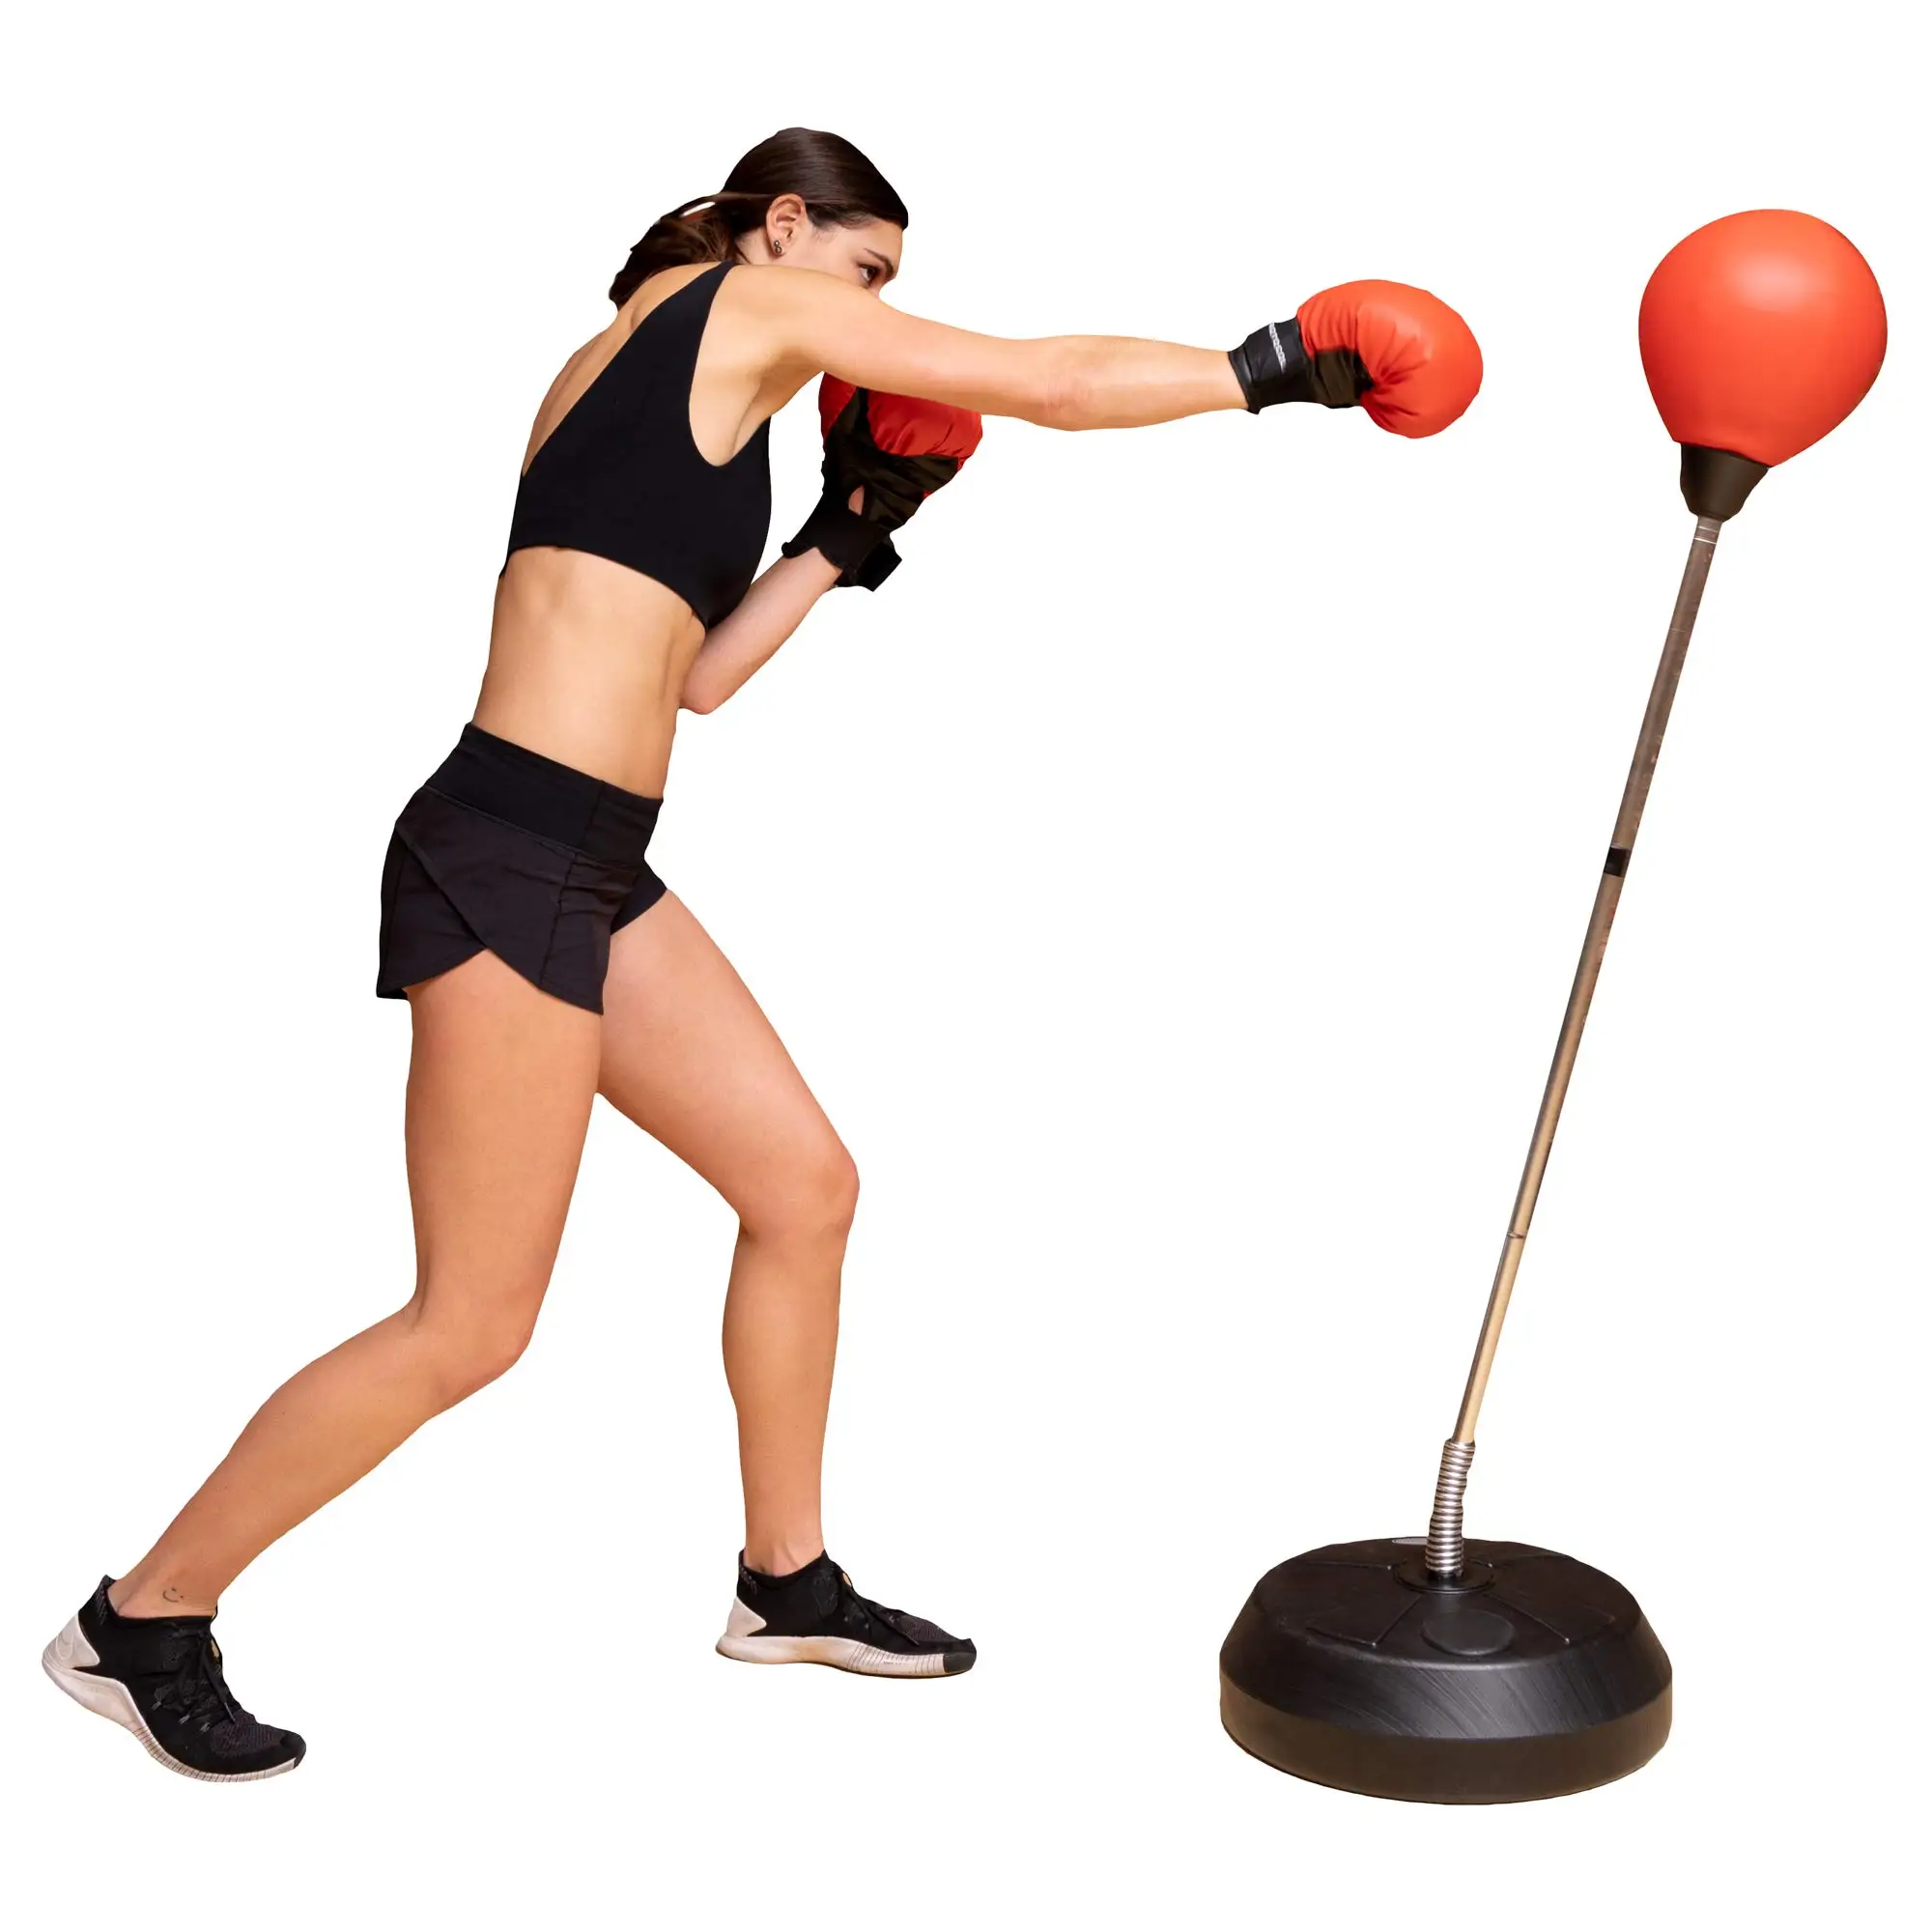 

Professional Free Boxing Equipment Standing Heavy Inflatable Punching Bags Training Target Bag kick Boxing Sand Punching Bag, Red